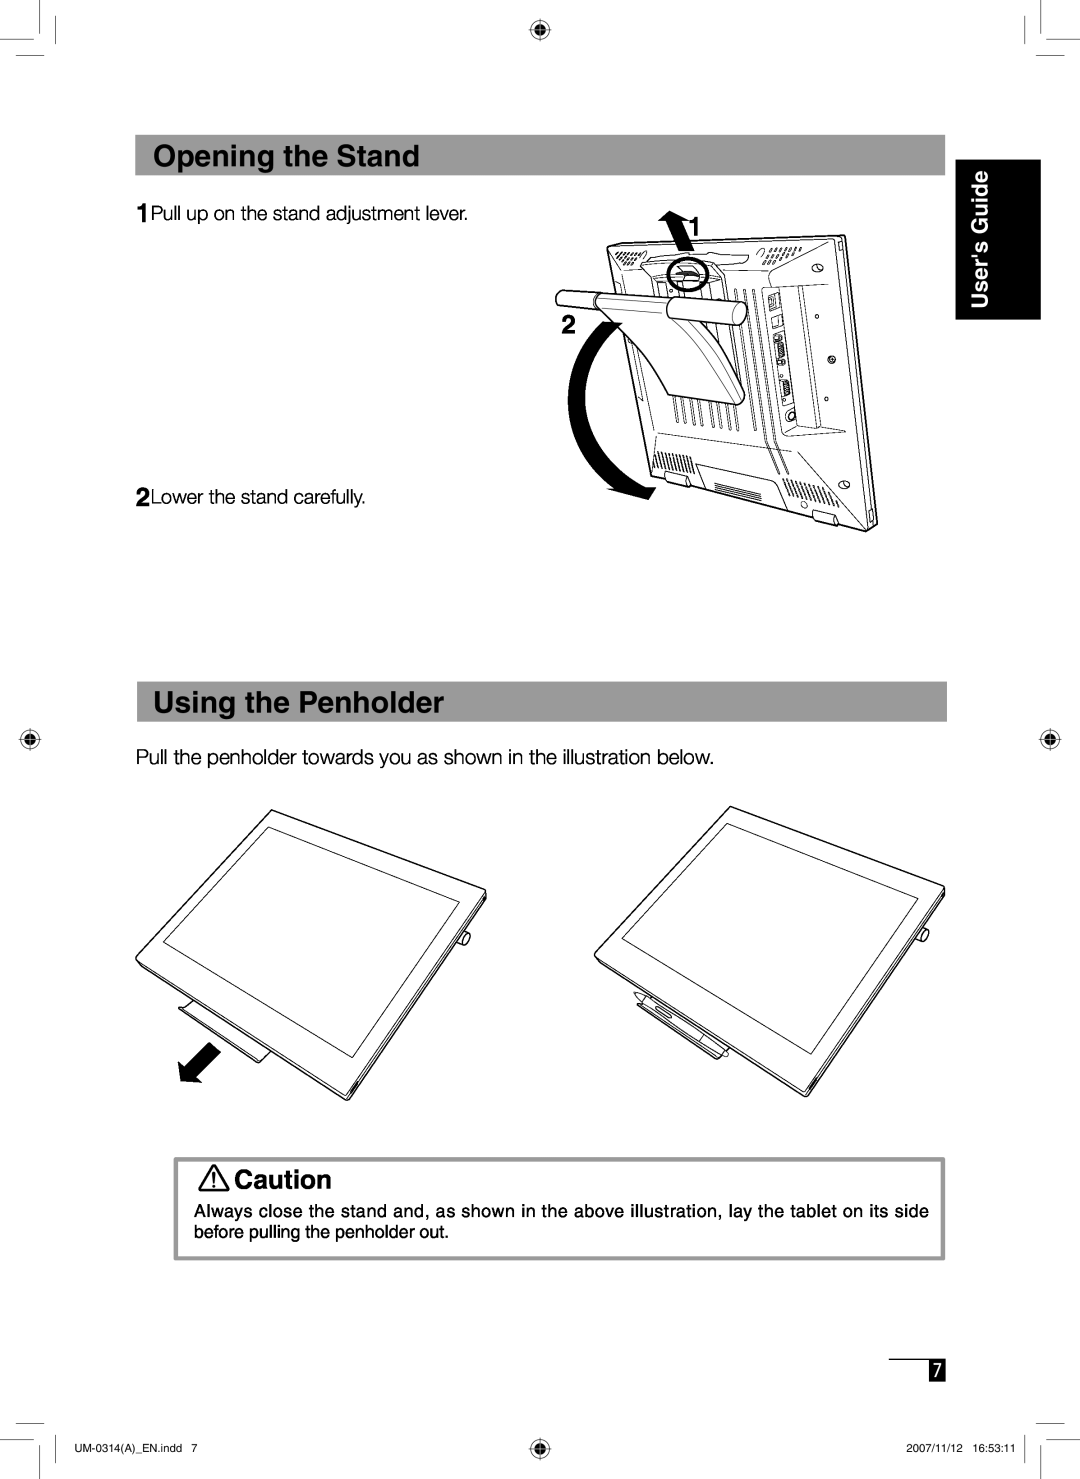 Wacom DTI-520 Opening the Stand, Using the Penholder, Users Guide, 1Pull up on the stand adjustment lever, UM-0314AEN.indd 